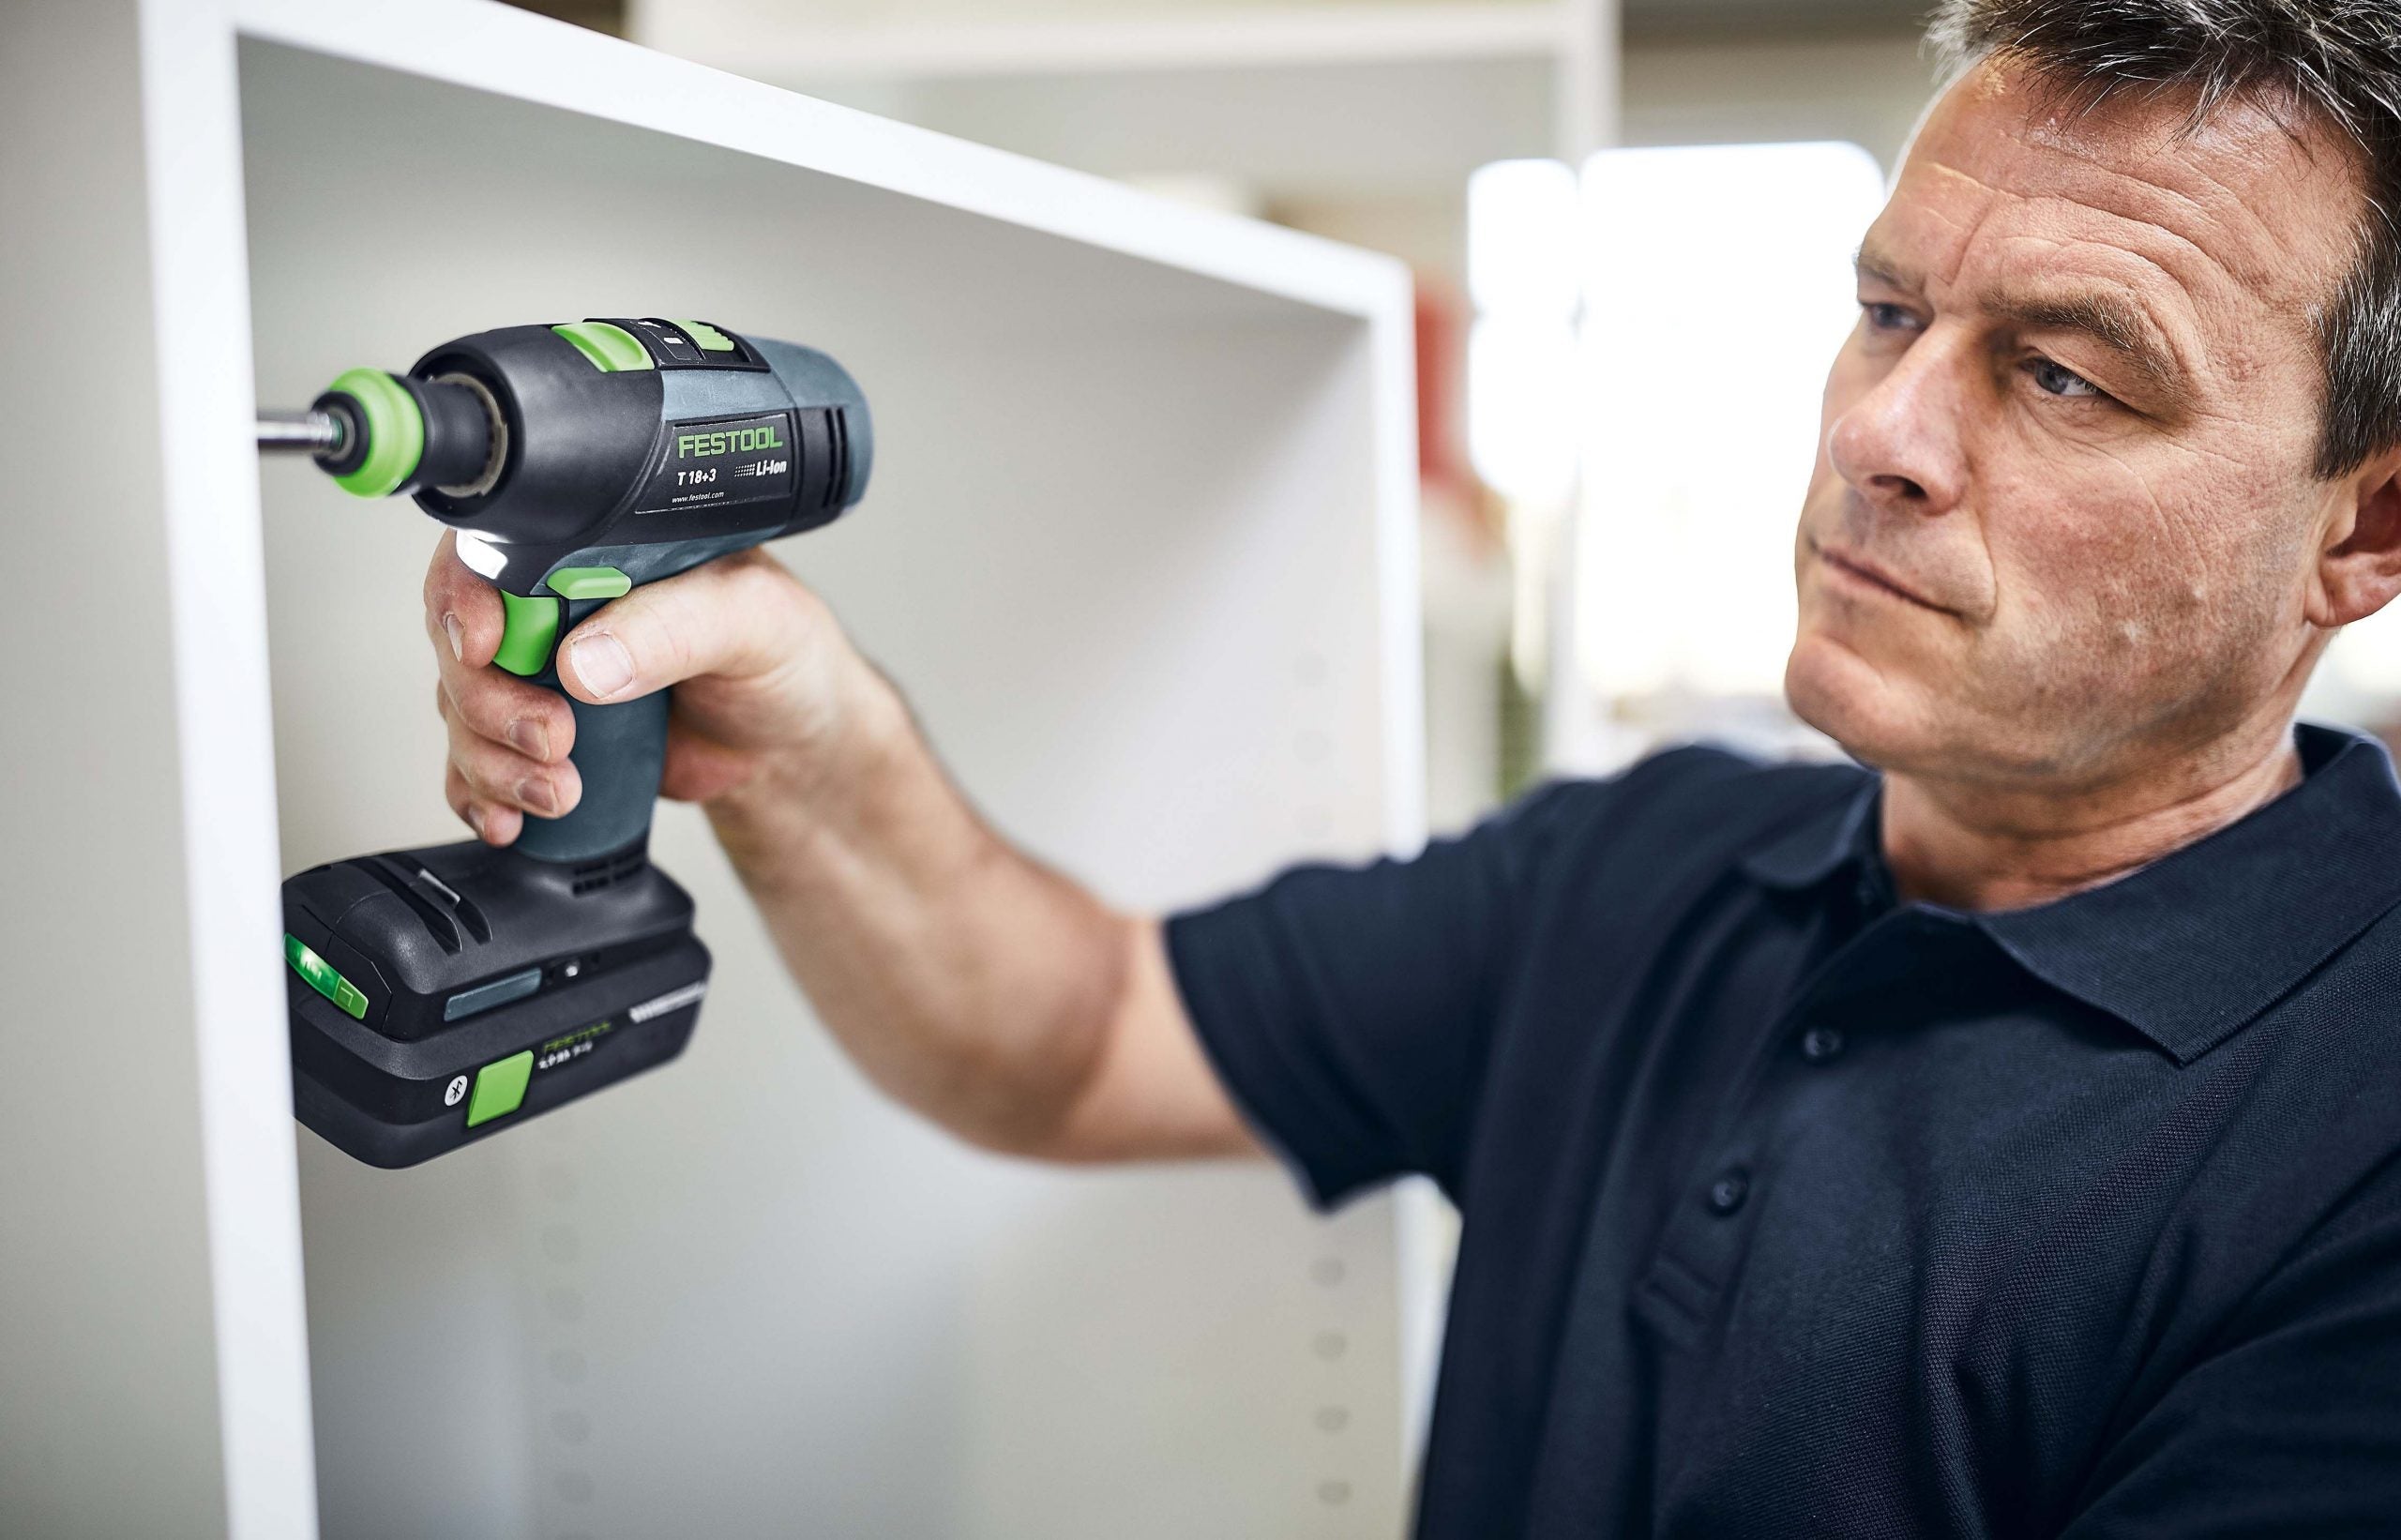 18V T Cordless 2 Speed Drill Basic in Systainer 576448 by Festool